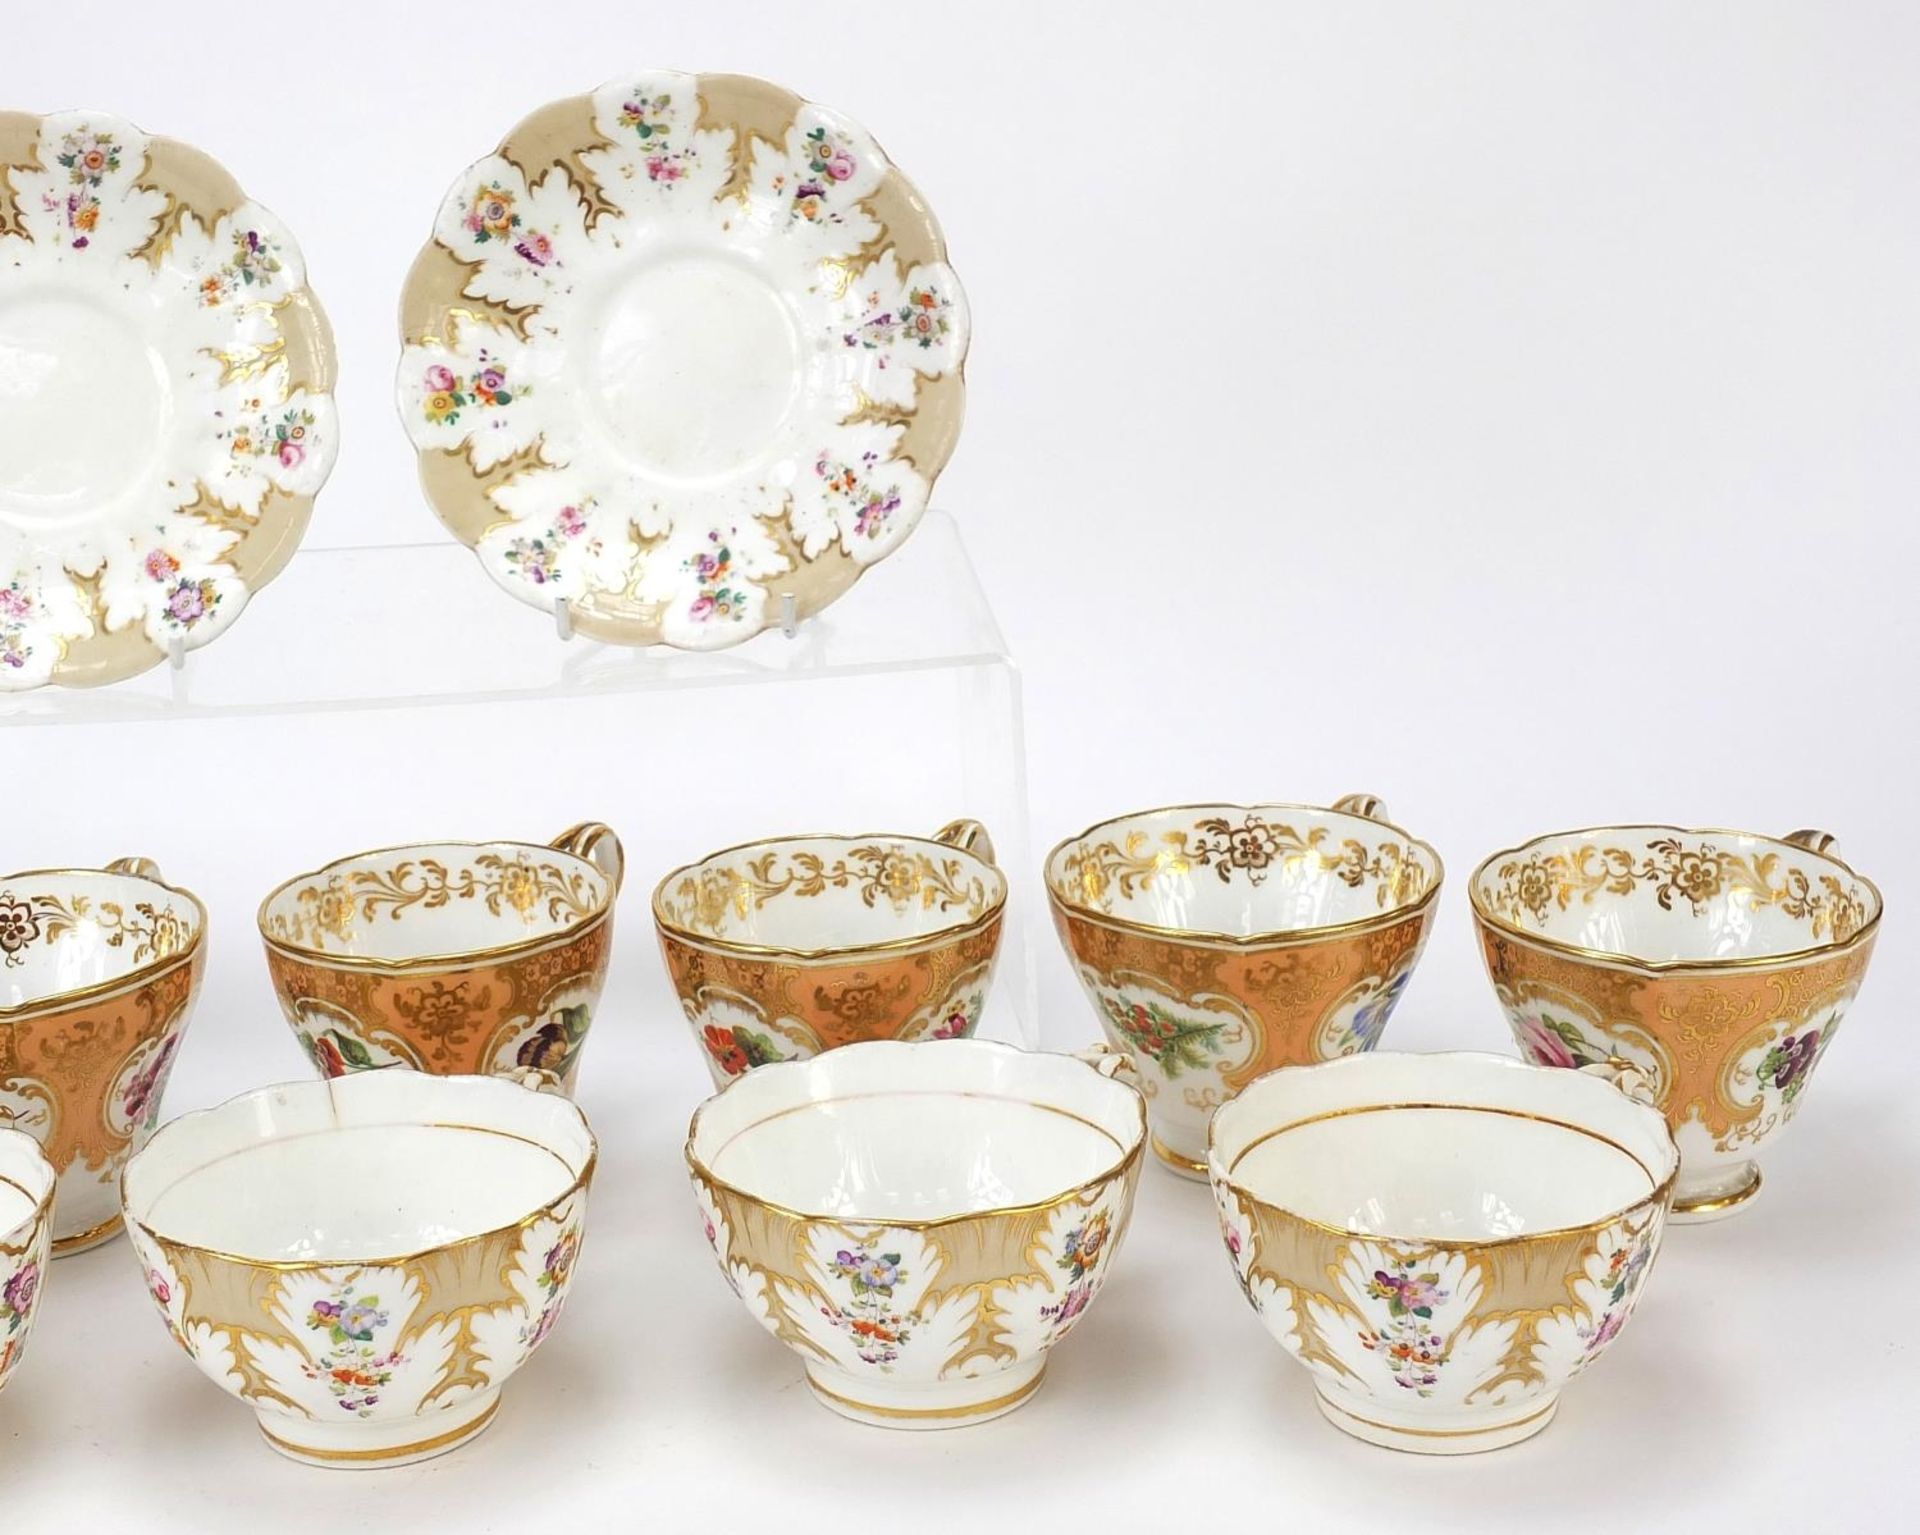 Early 19th century English teaware hand painted with flowers, patter number 174 and 2253, the - Bild 3 aus 7